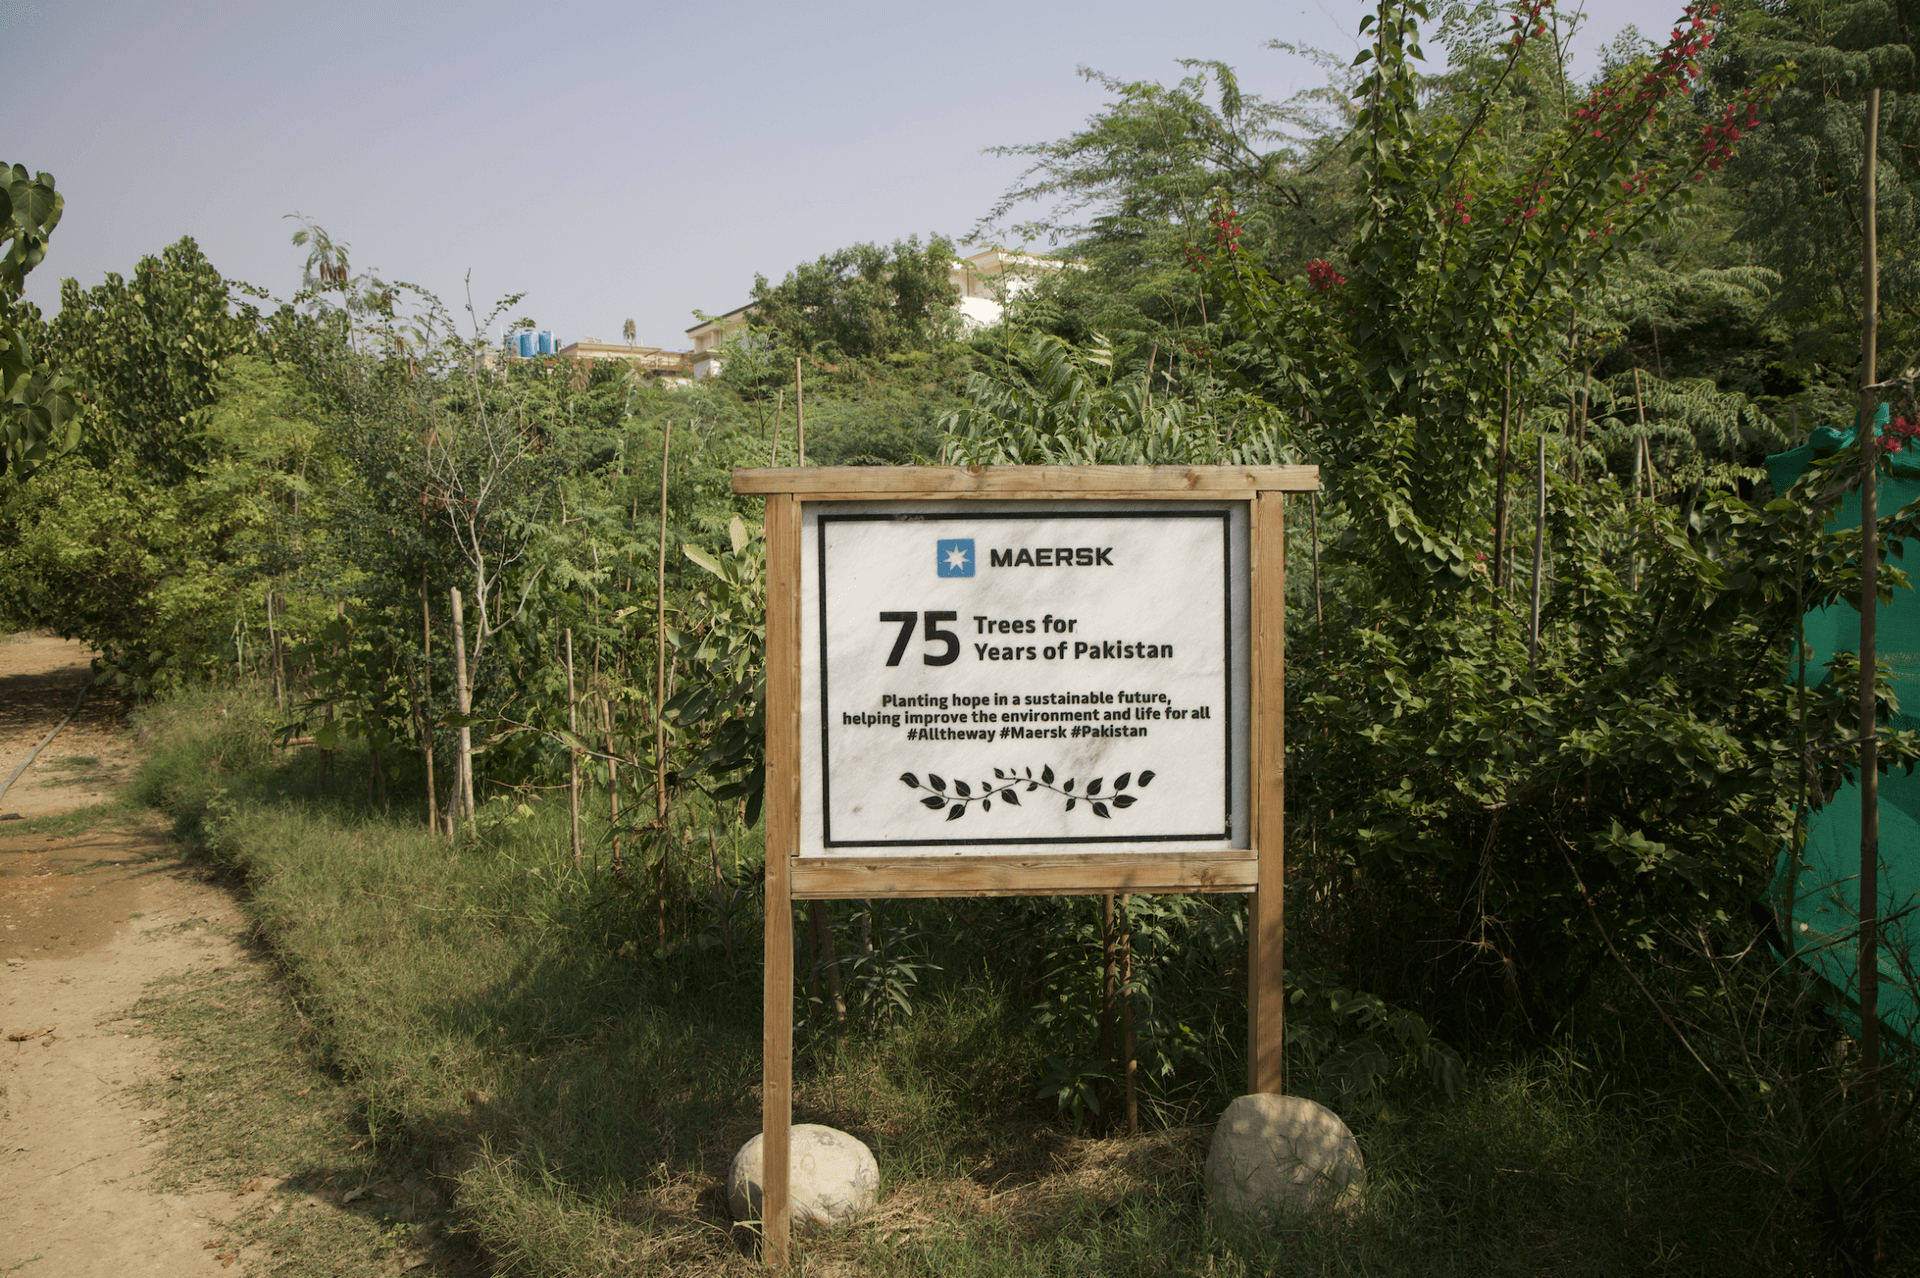 Shahzad Qureshi’s first urban forest, three densely planted acres in the Clifton neighborhood of Karachi, Pakistan.